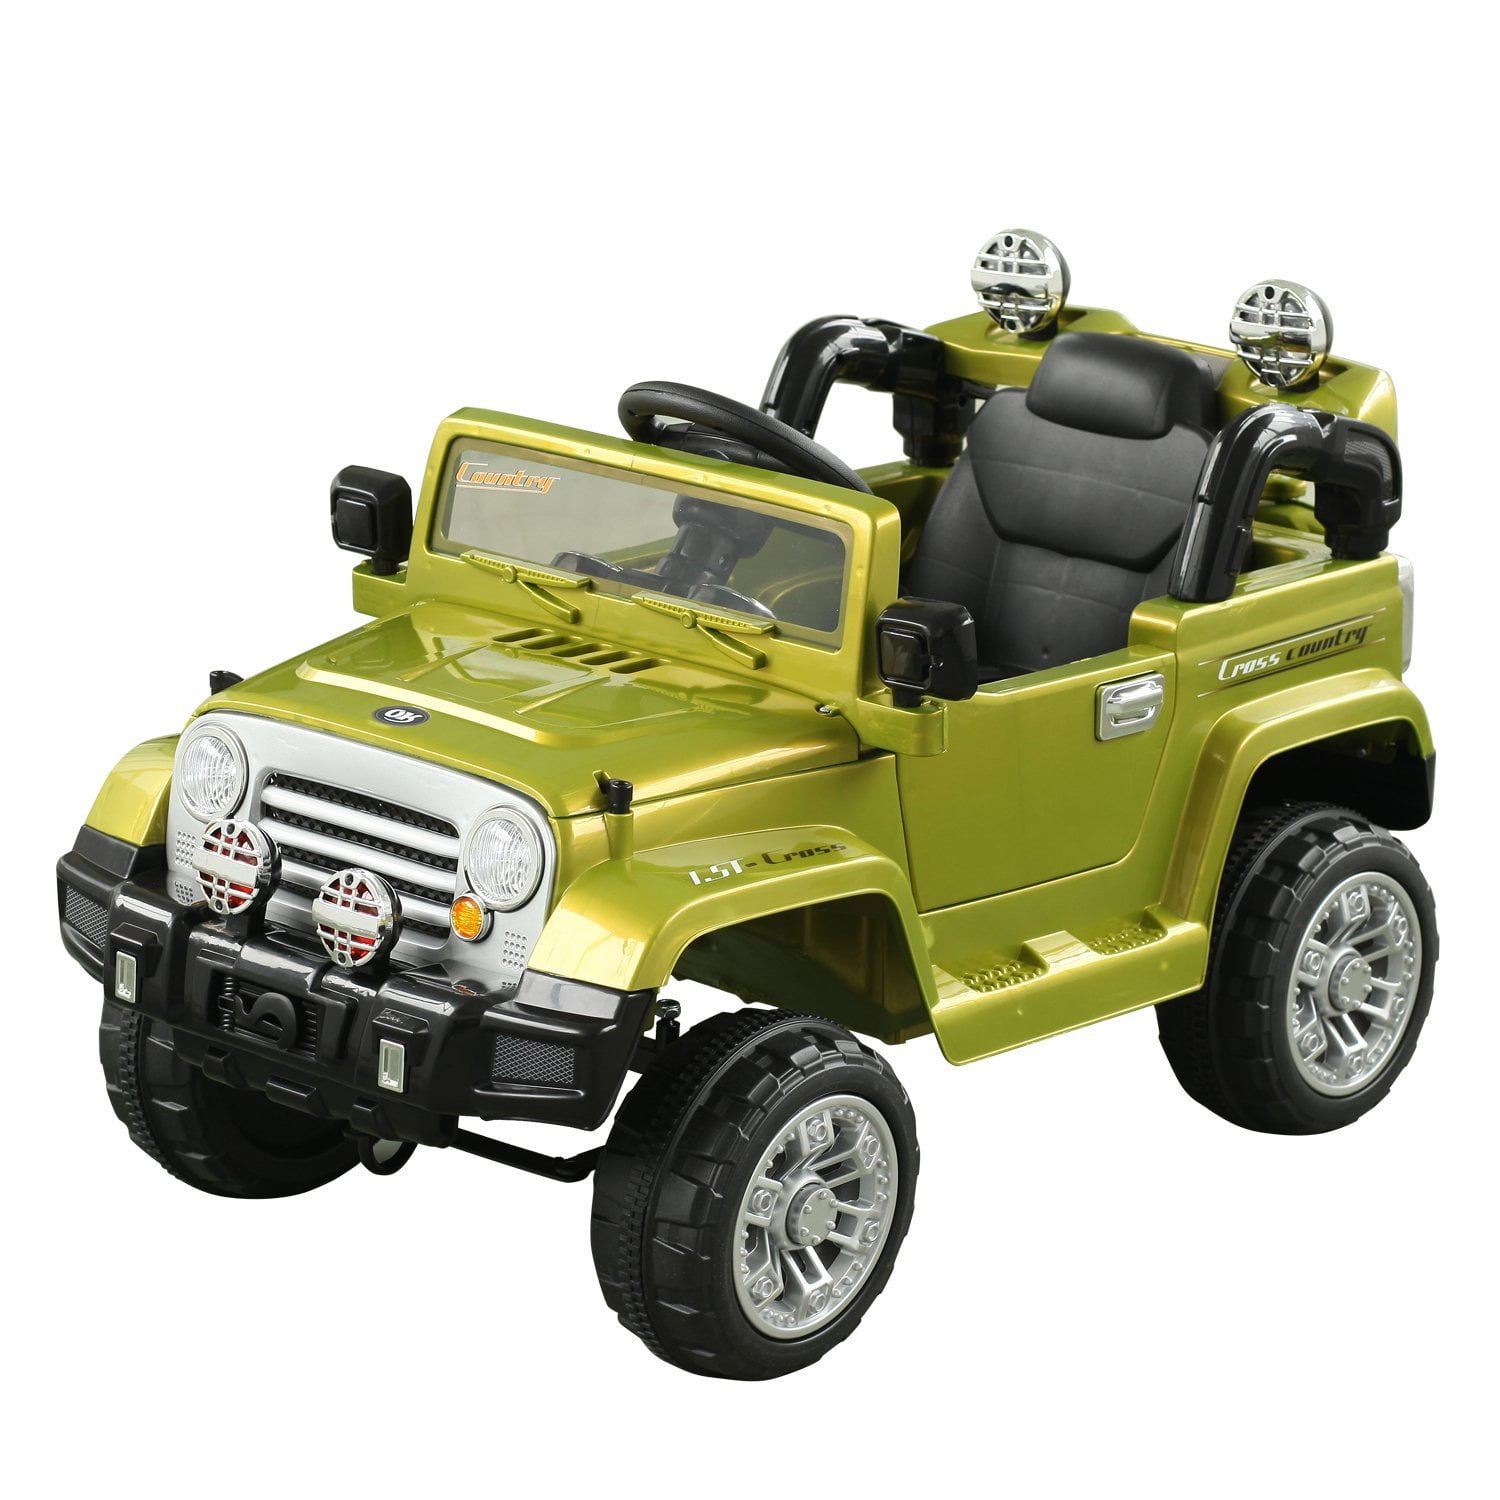 Kids Electric Battery Ride-On Toy Jeep Car w/ Remote Control-Olive ...